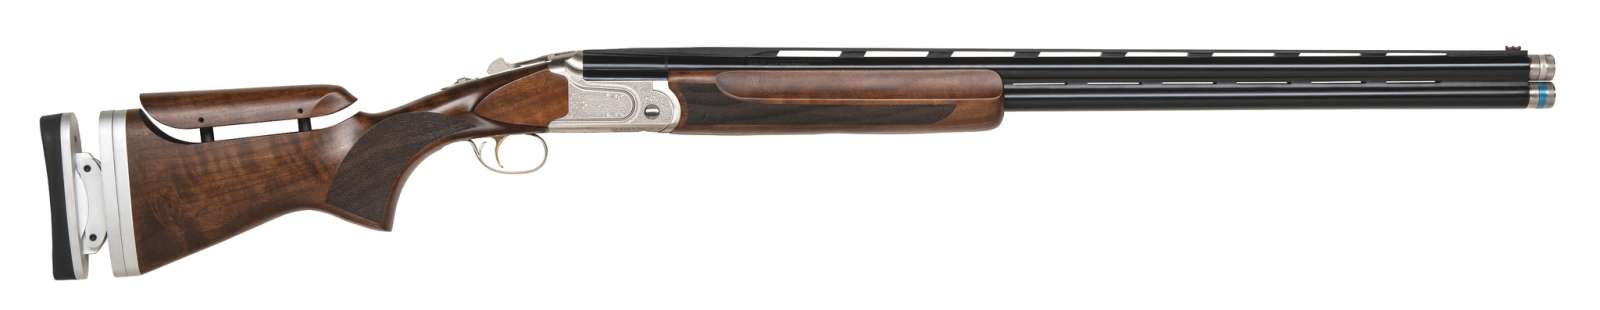 MOSSBERG GOLD RESERVE SGD 12GA 30IN BBL POLISHED SILVER W/GOLD INLAY GRADE A BLACK WALNUT 2RD